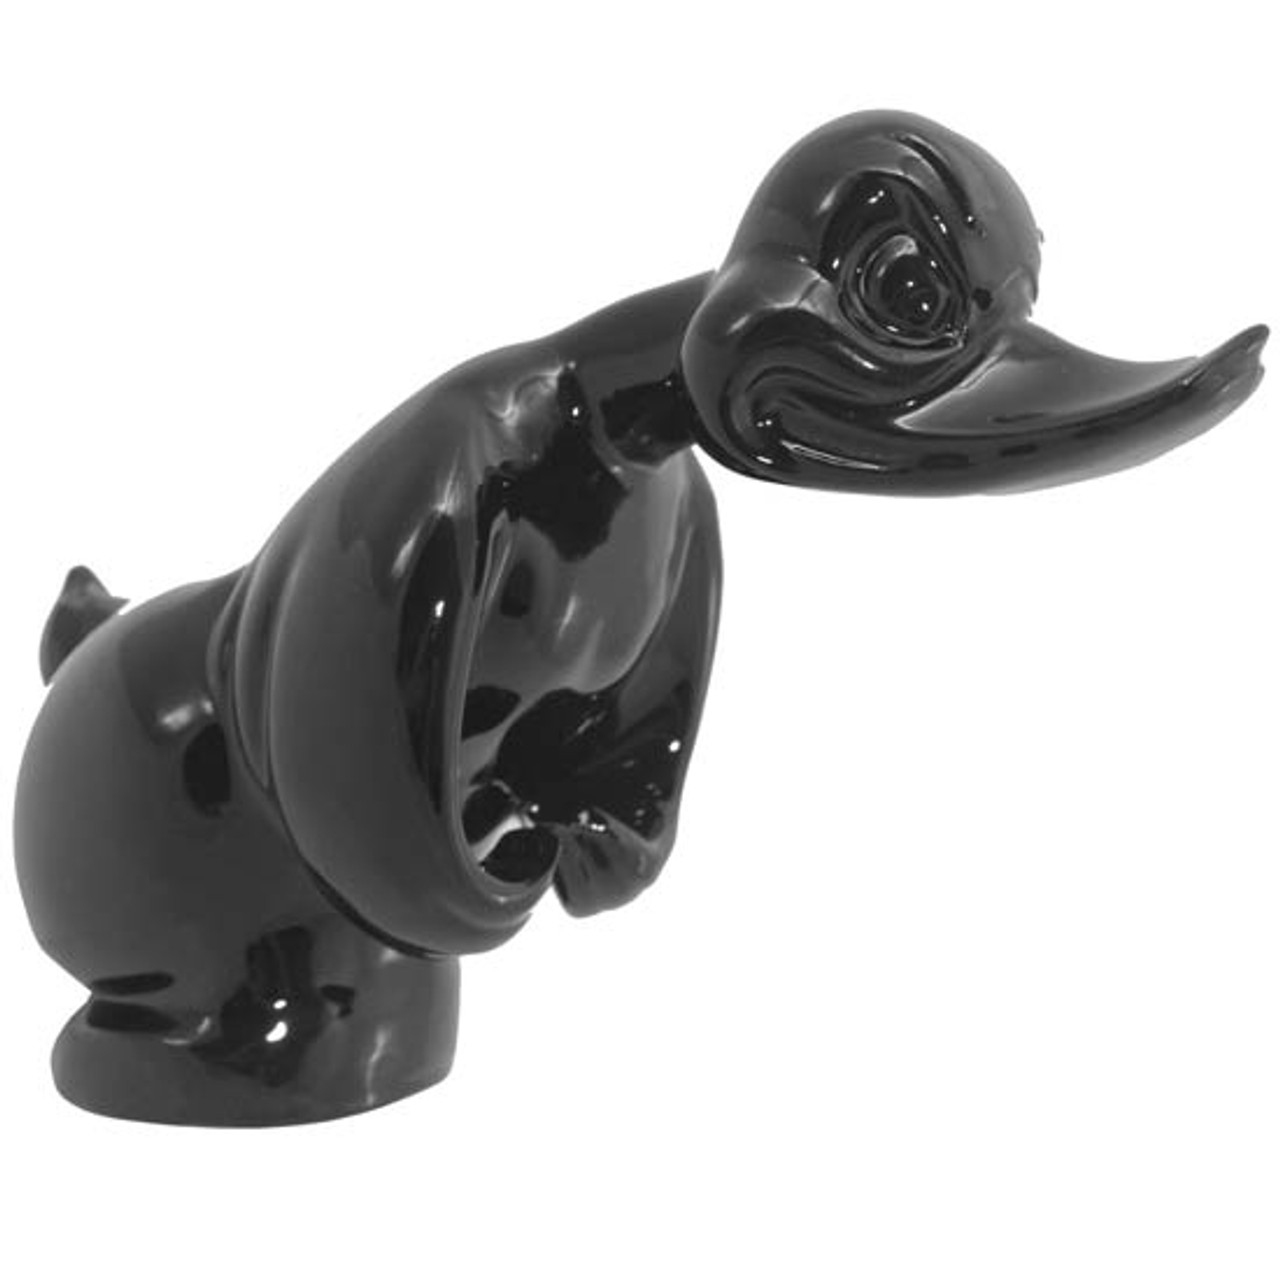  Death Proof Duck Black Convoy Duck Hood Ornament - Made in USA  - Authentic : Sports & Outdoors